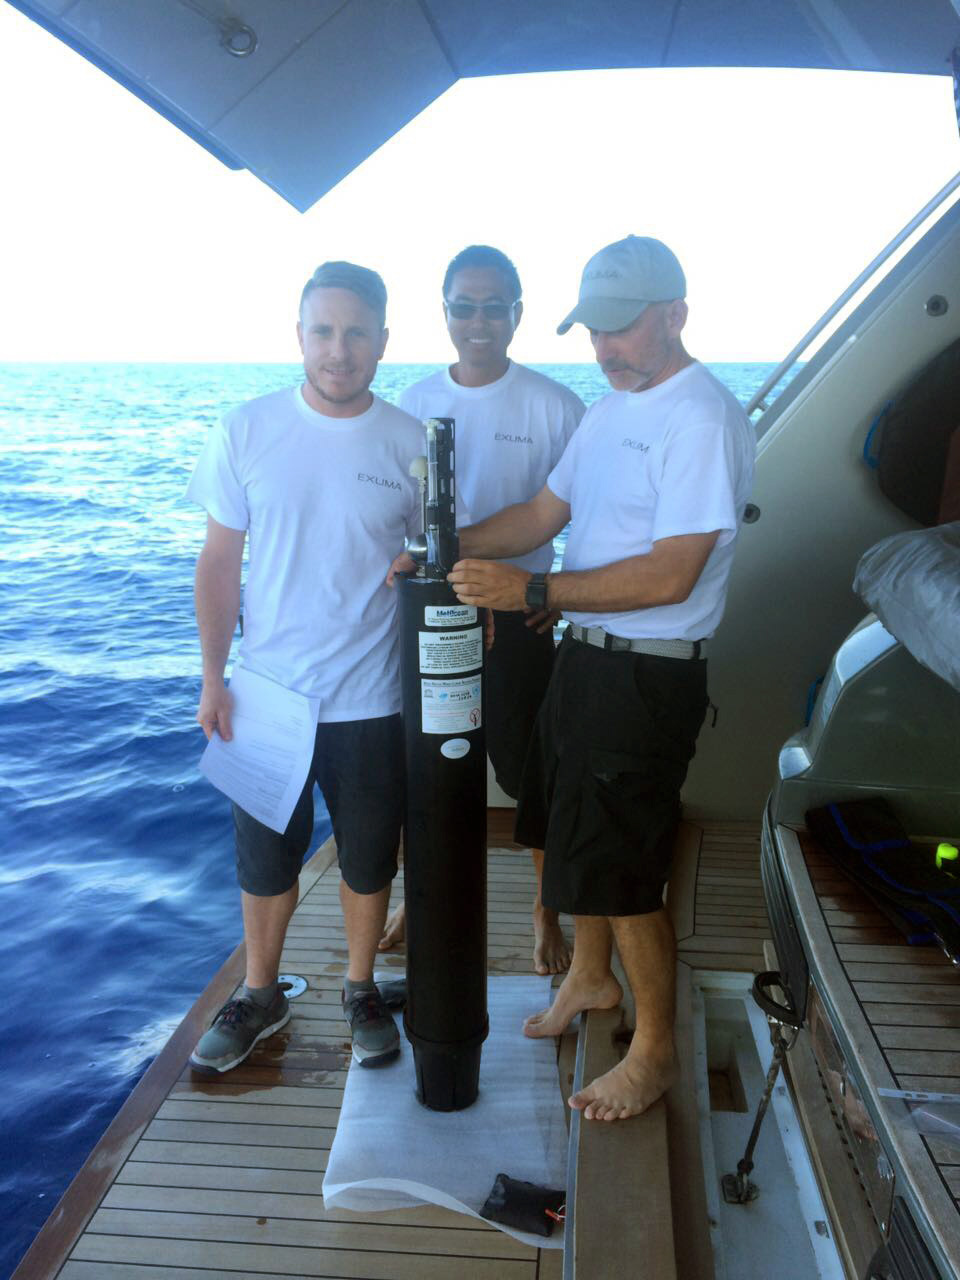 Seakeepers scientists deploy an ARGO profiling float from the M/Y Exuma in the Mediterranean Sea.